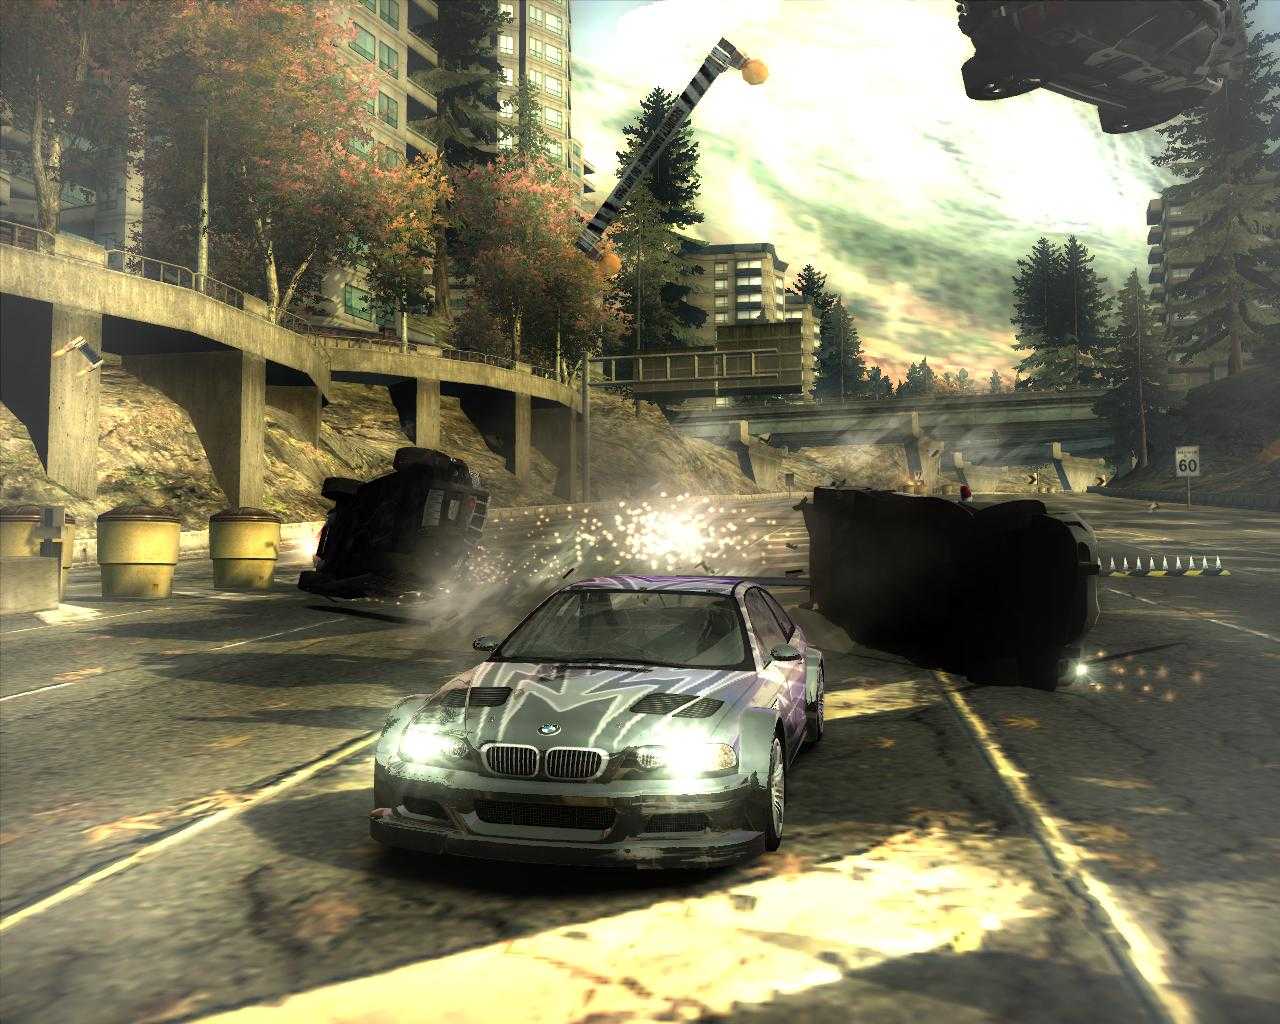 Need for speed most wanted песни. Игра NFS most wanted 2005. Нфс мост вантед 2005. Гонки NFS most wanted 2005. NFS мост вантед 2005.